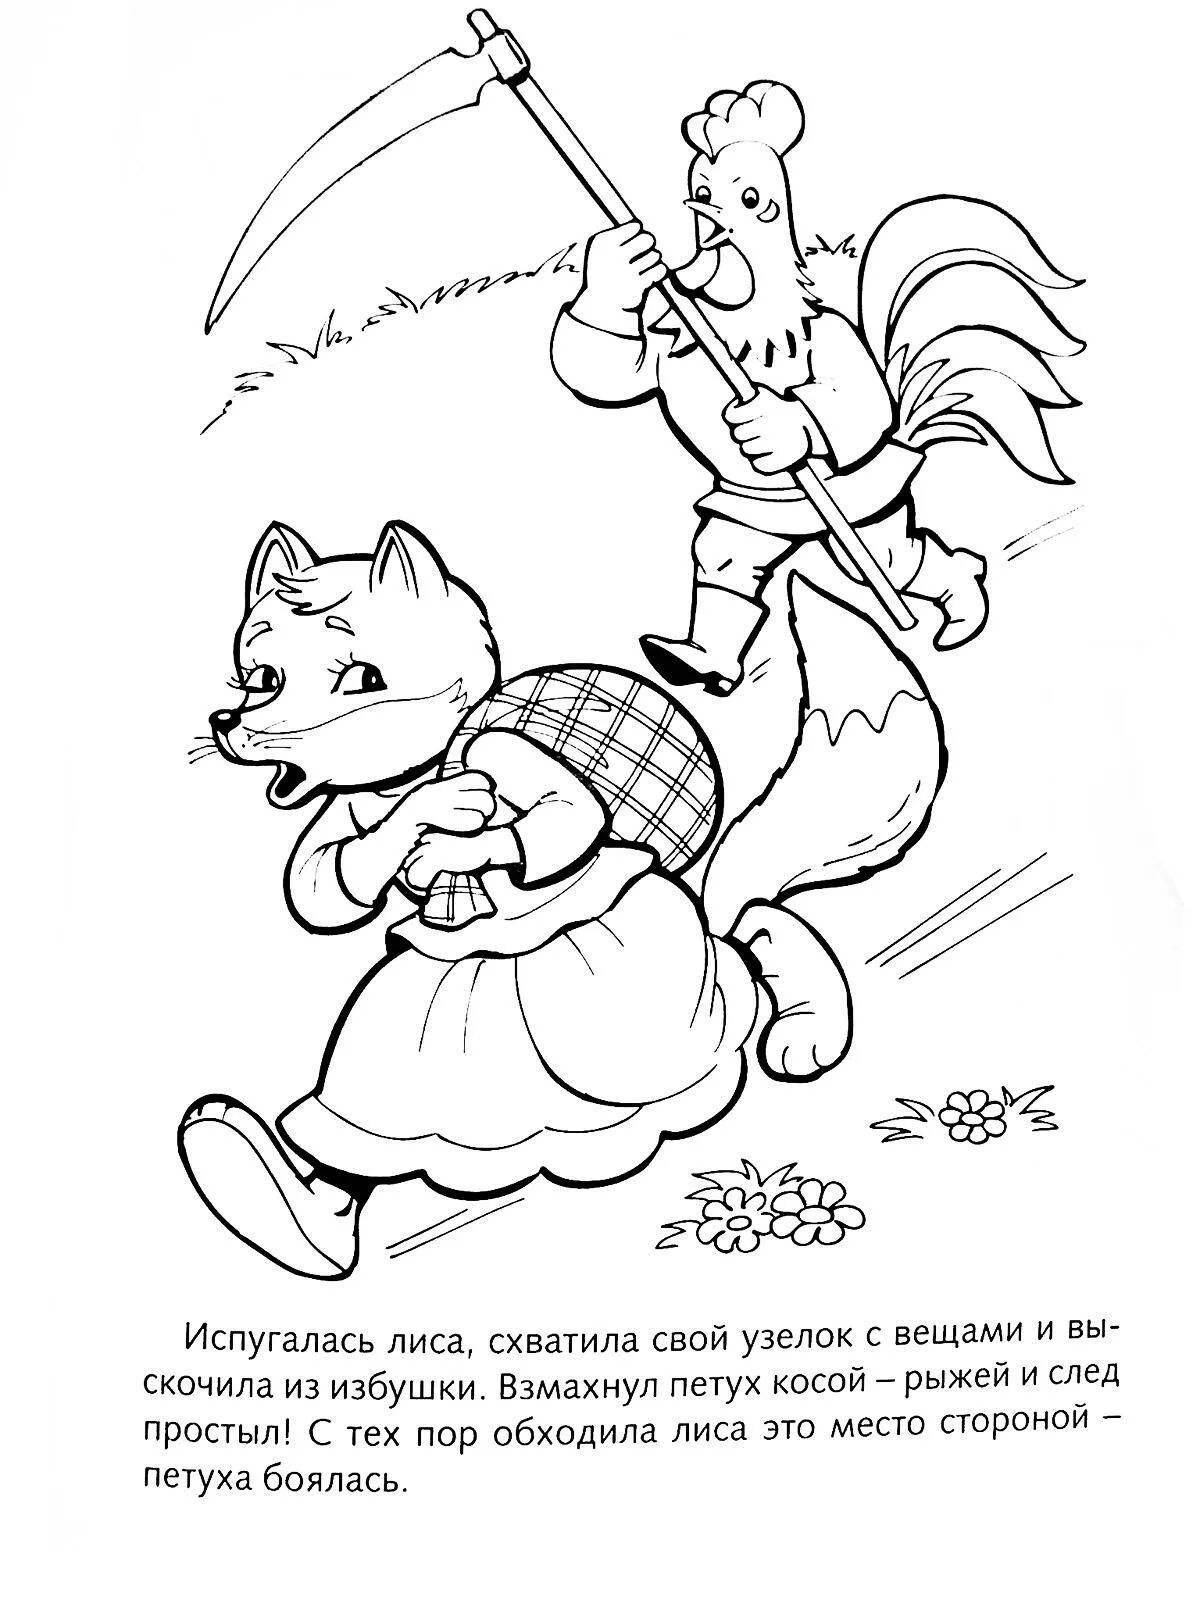 Glorious coloring fox and rooster Russian folk tale